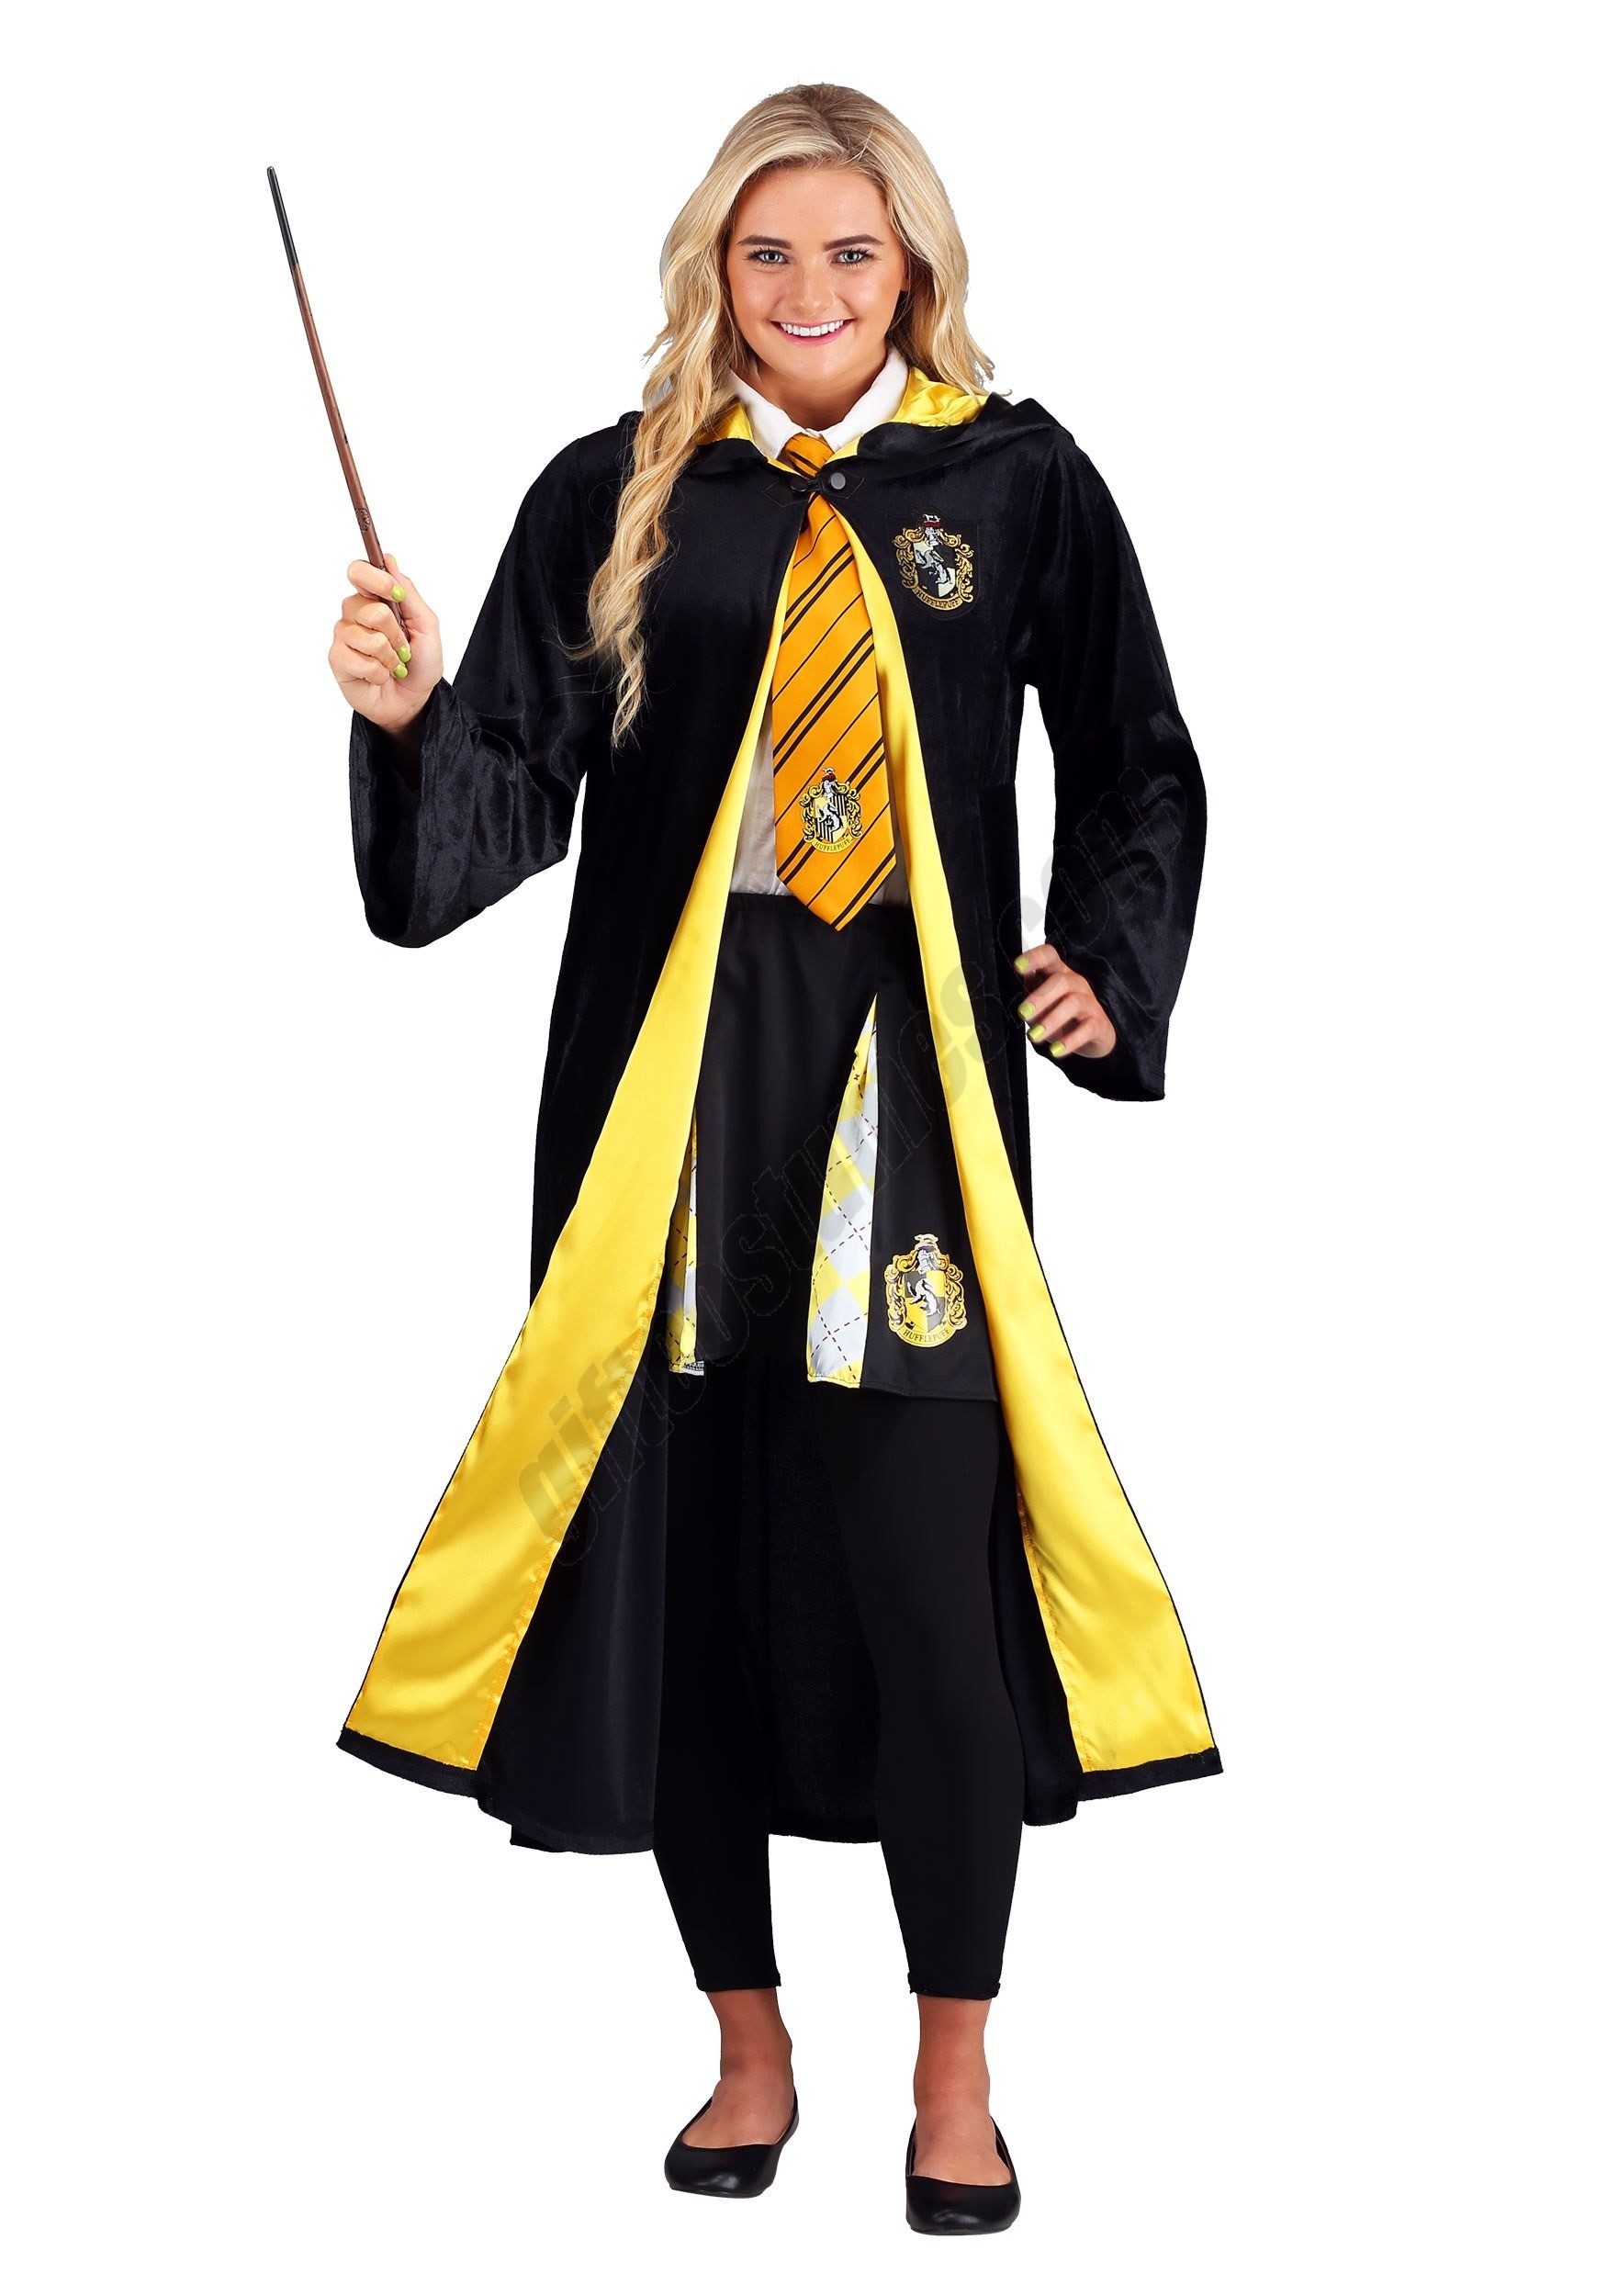 Deluxe Harry Potter Adult Plus Size Hufflepuff Robe Costume Promotions - Deluxe Harry Potter Adult Plus Size Hufflepuff Robe Costume Promotions